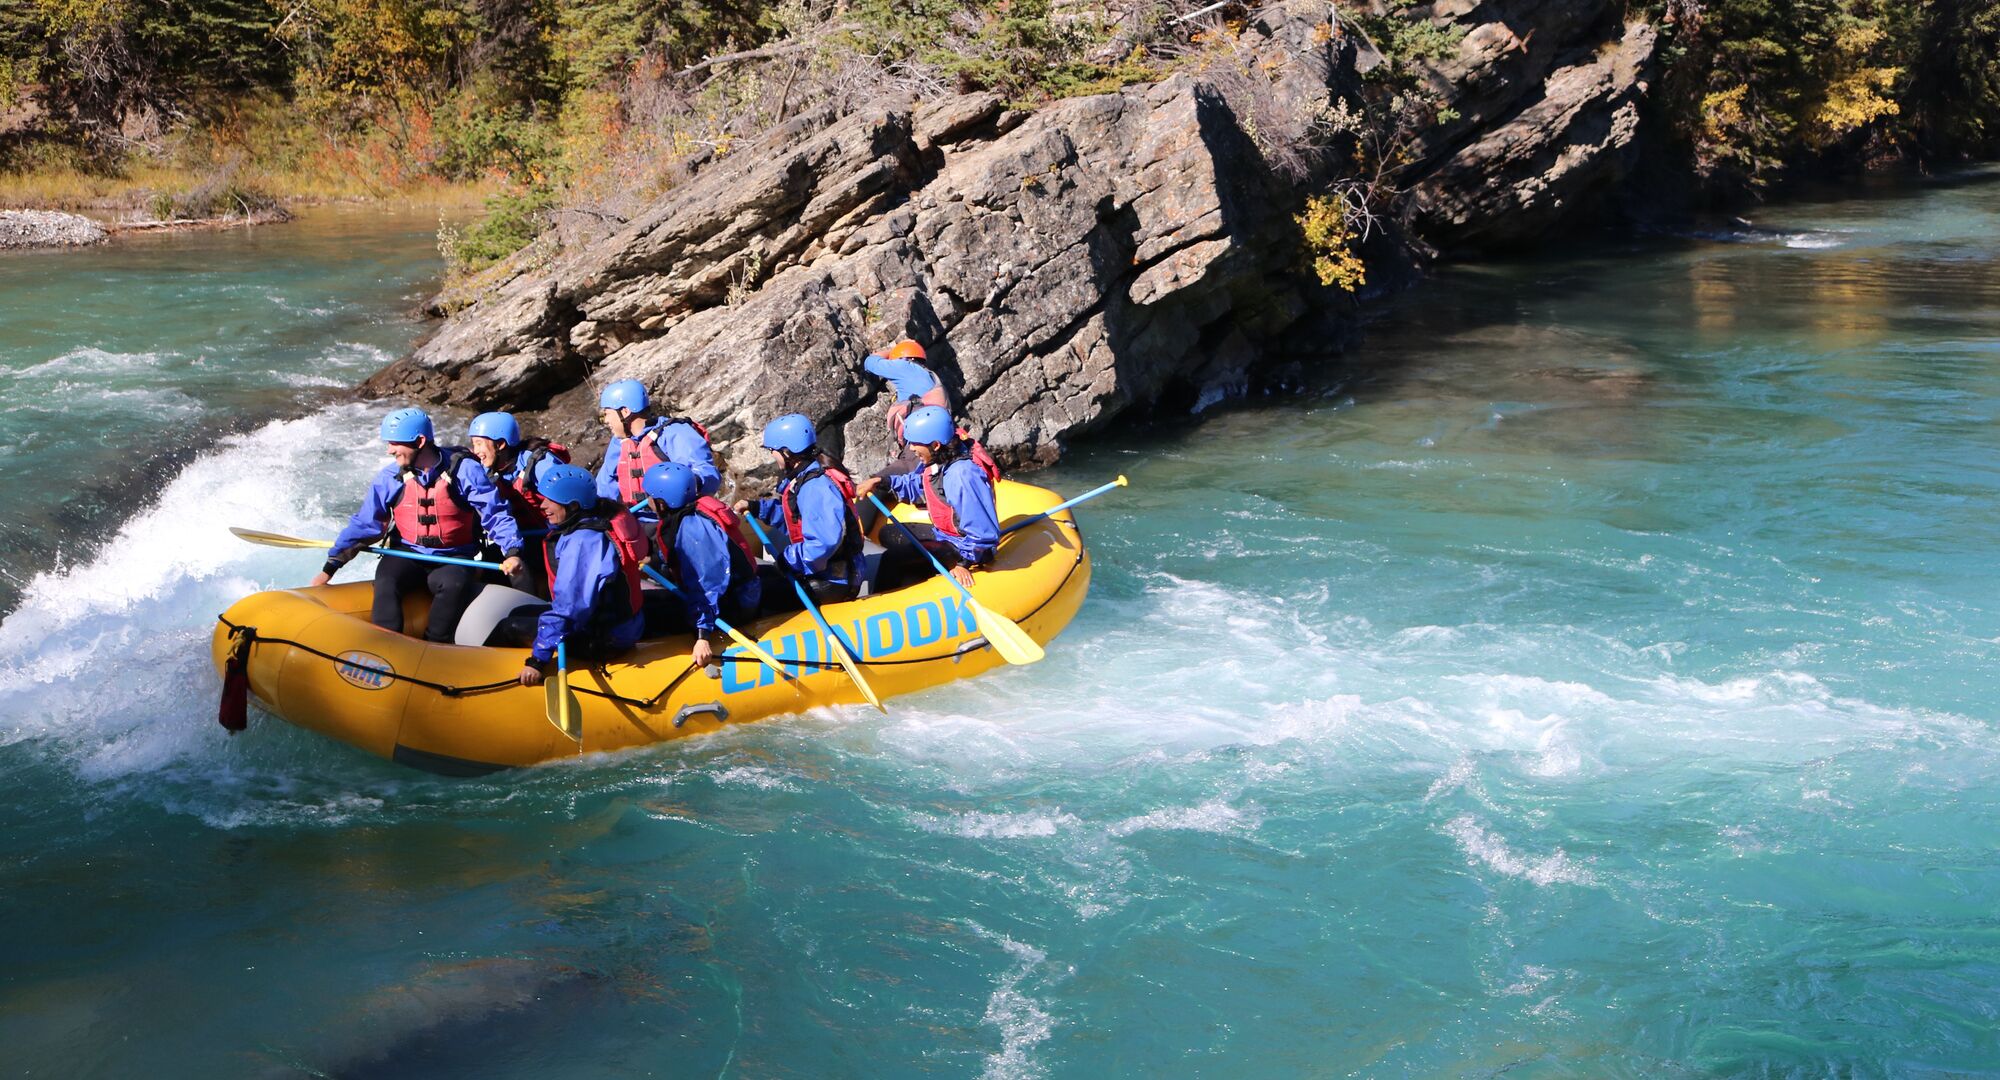 Group of people white water rafting on the turquoise Kananaskis River